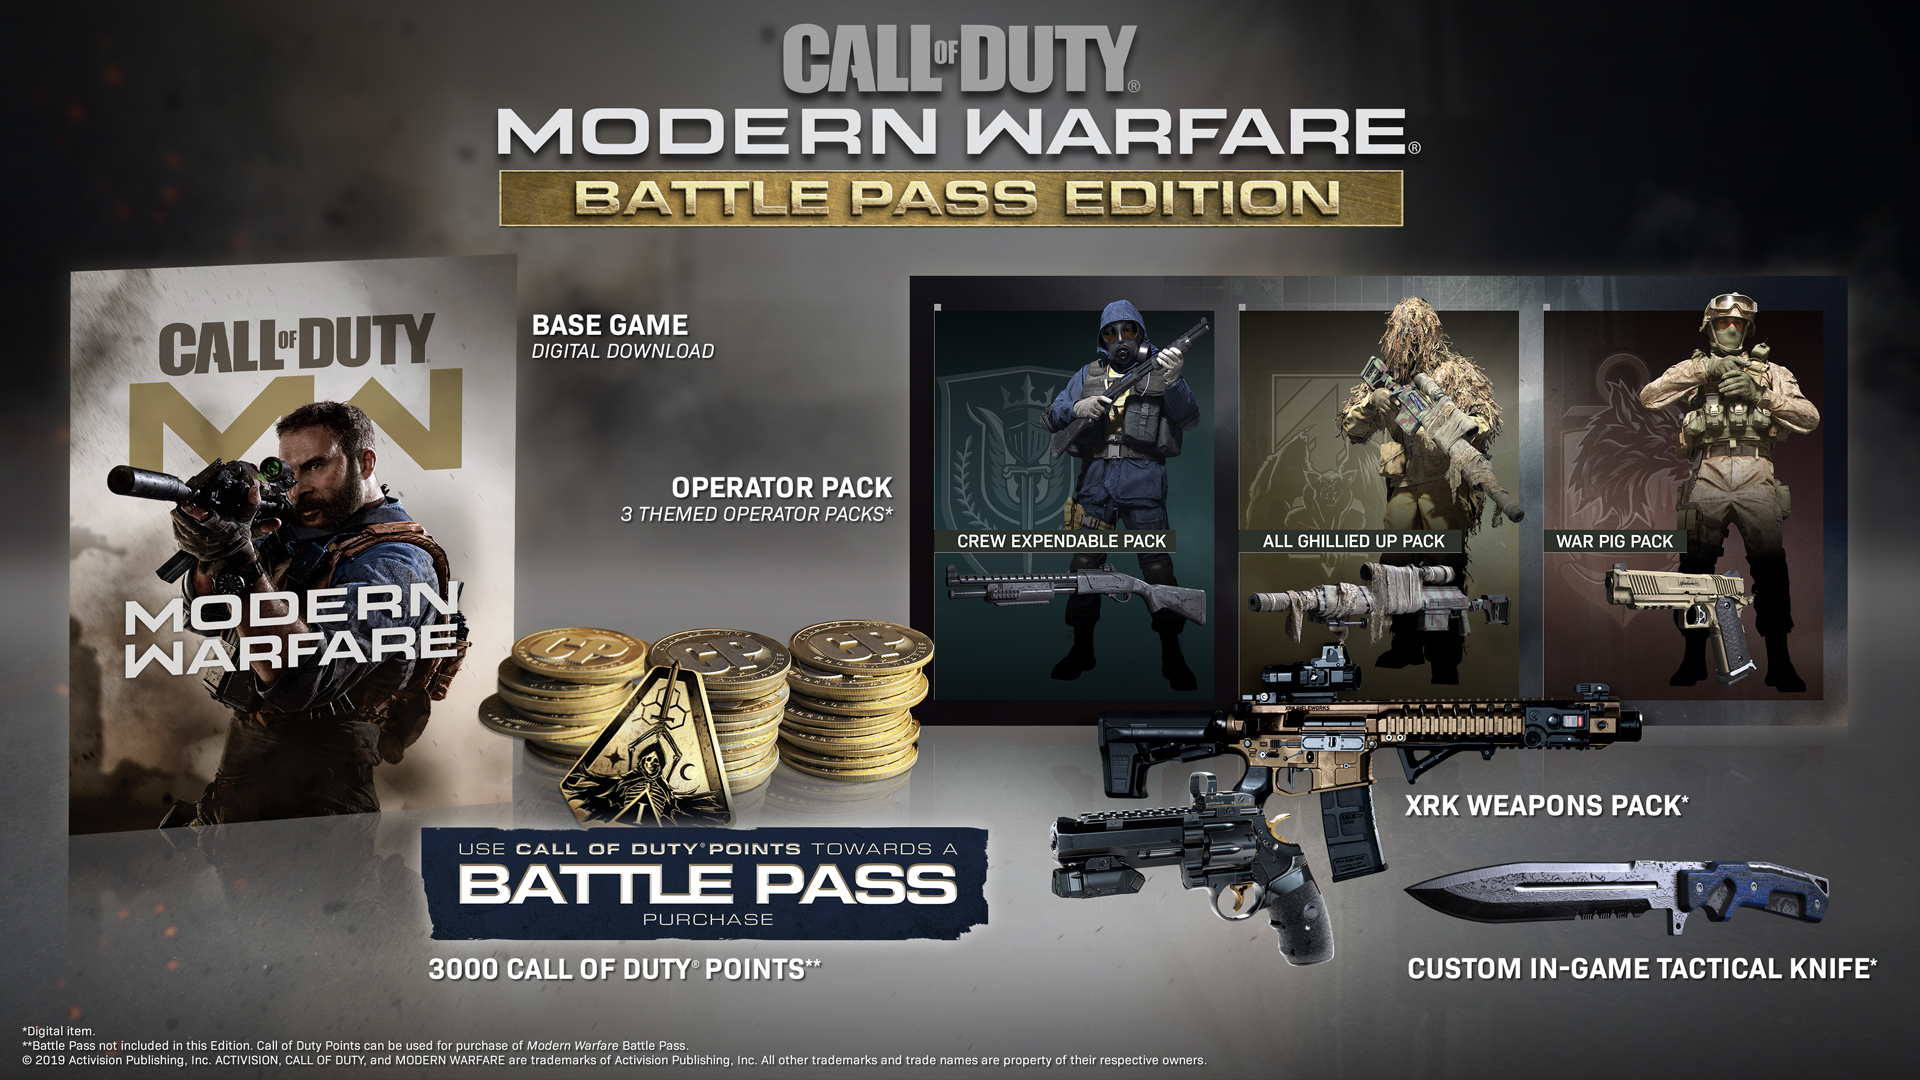 Electrify Arkæologi Delegation CharlieIntel on Twitter: "For those who have not purchased Modern Warfare  yet, Activision has released a new Modern Warfare Battle Pass Edition bundle  on PS4, Xbox One, and PC https://t.co/UeYno9ij6d https://t.co/0aljzmF9Ah" /